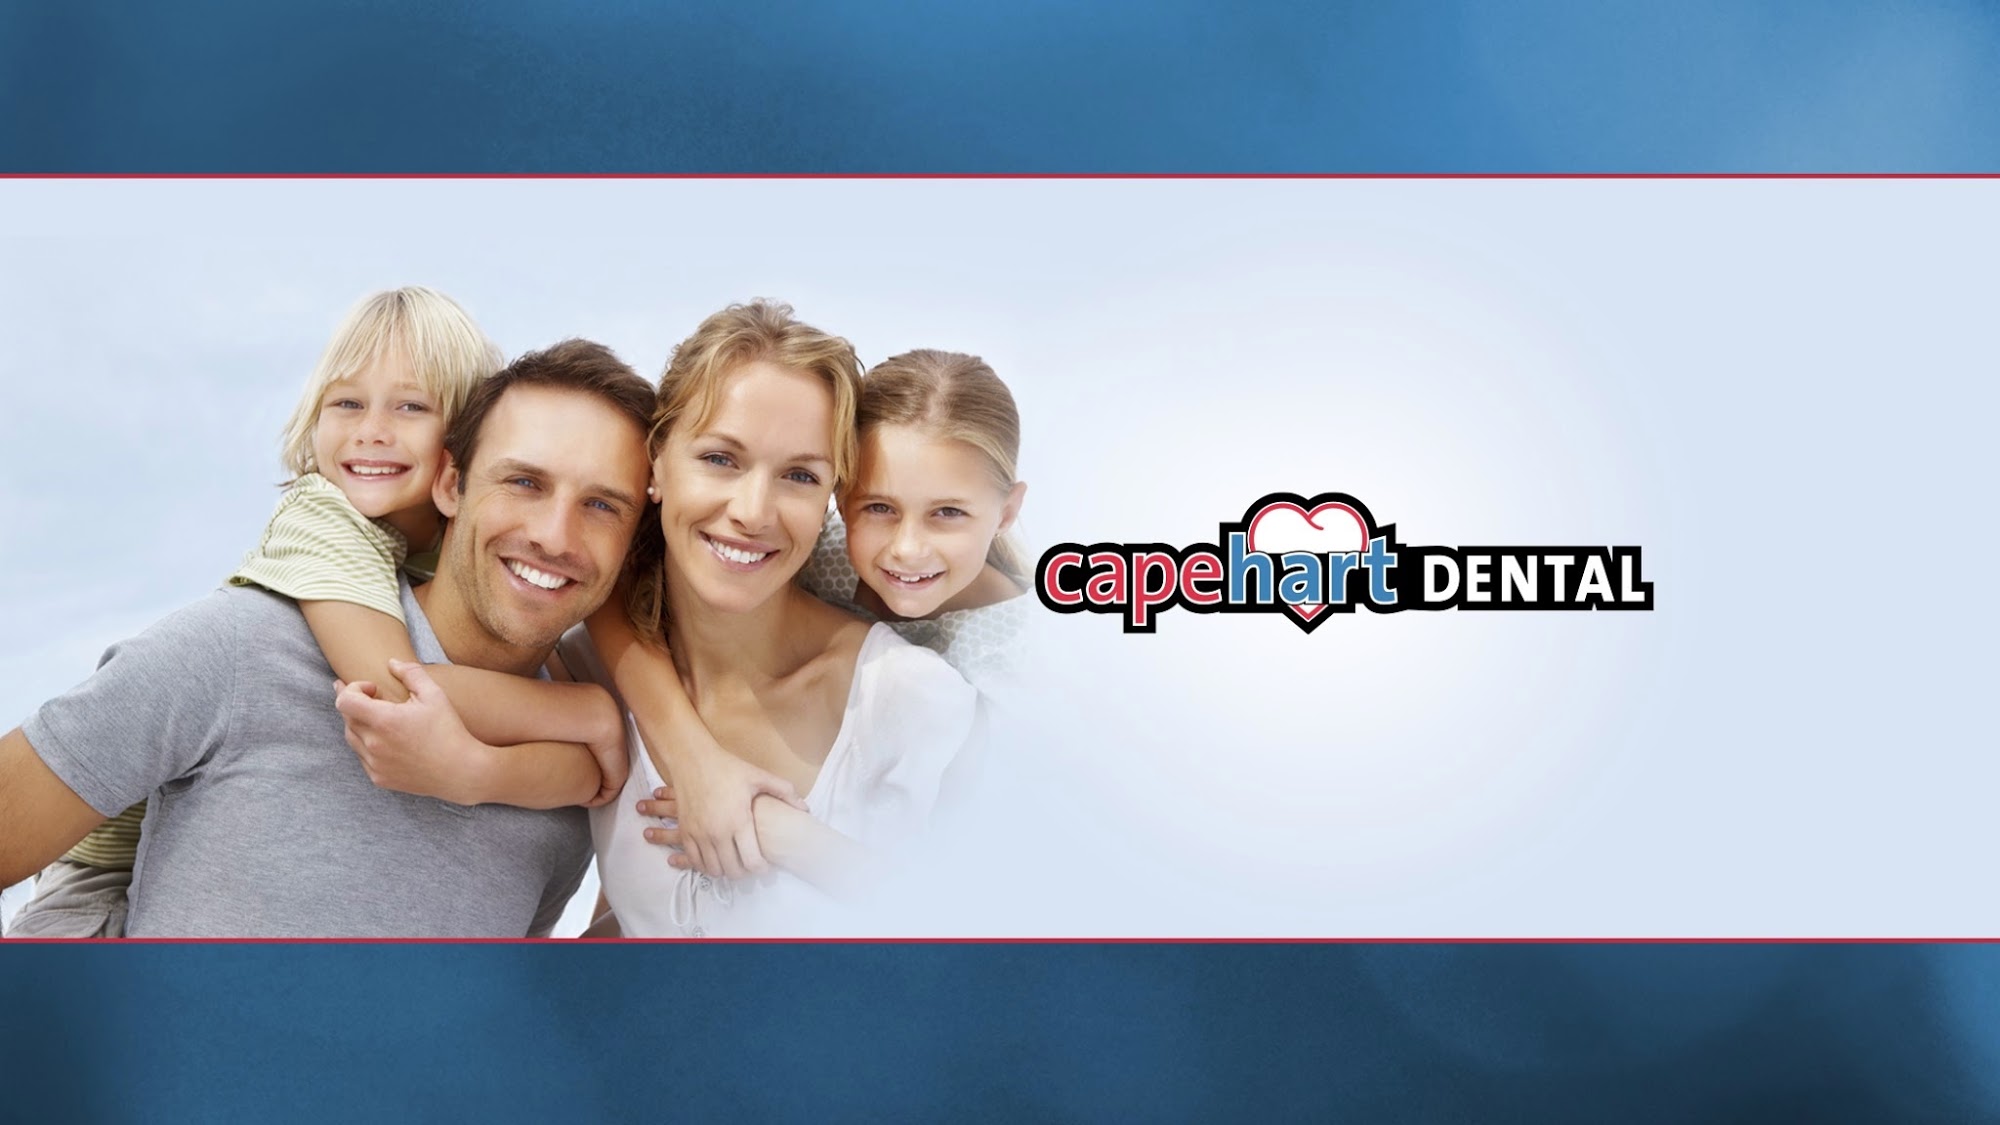 Capehart Dental of Lewisville